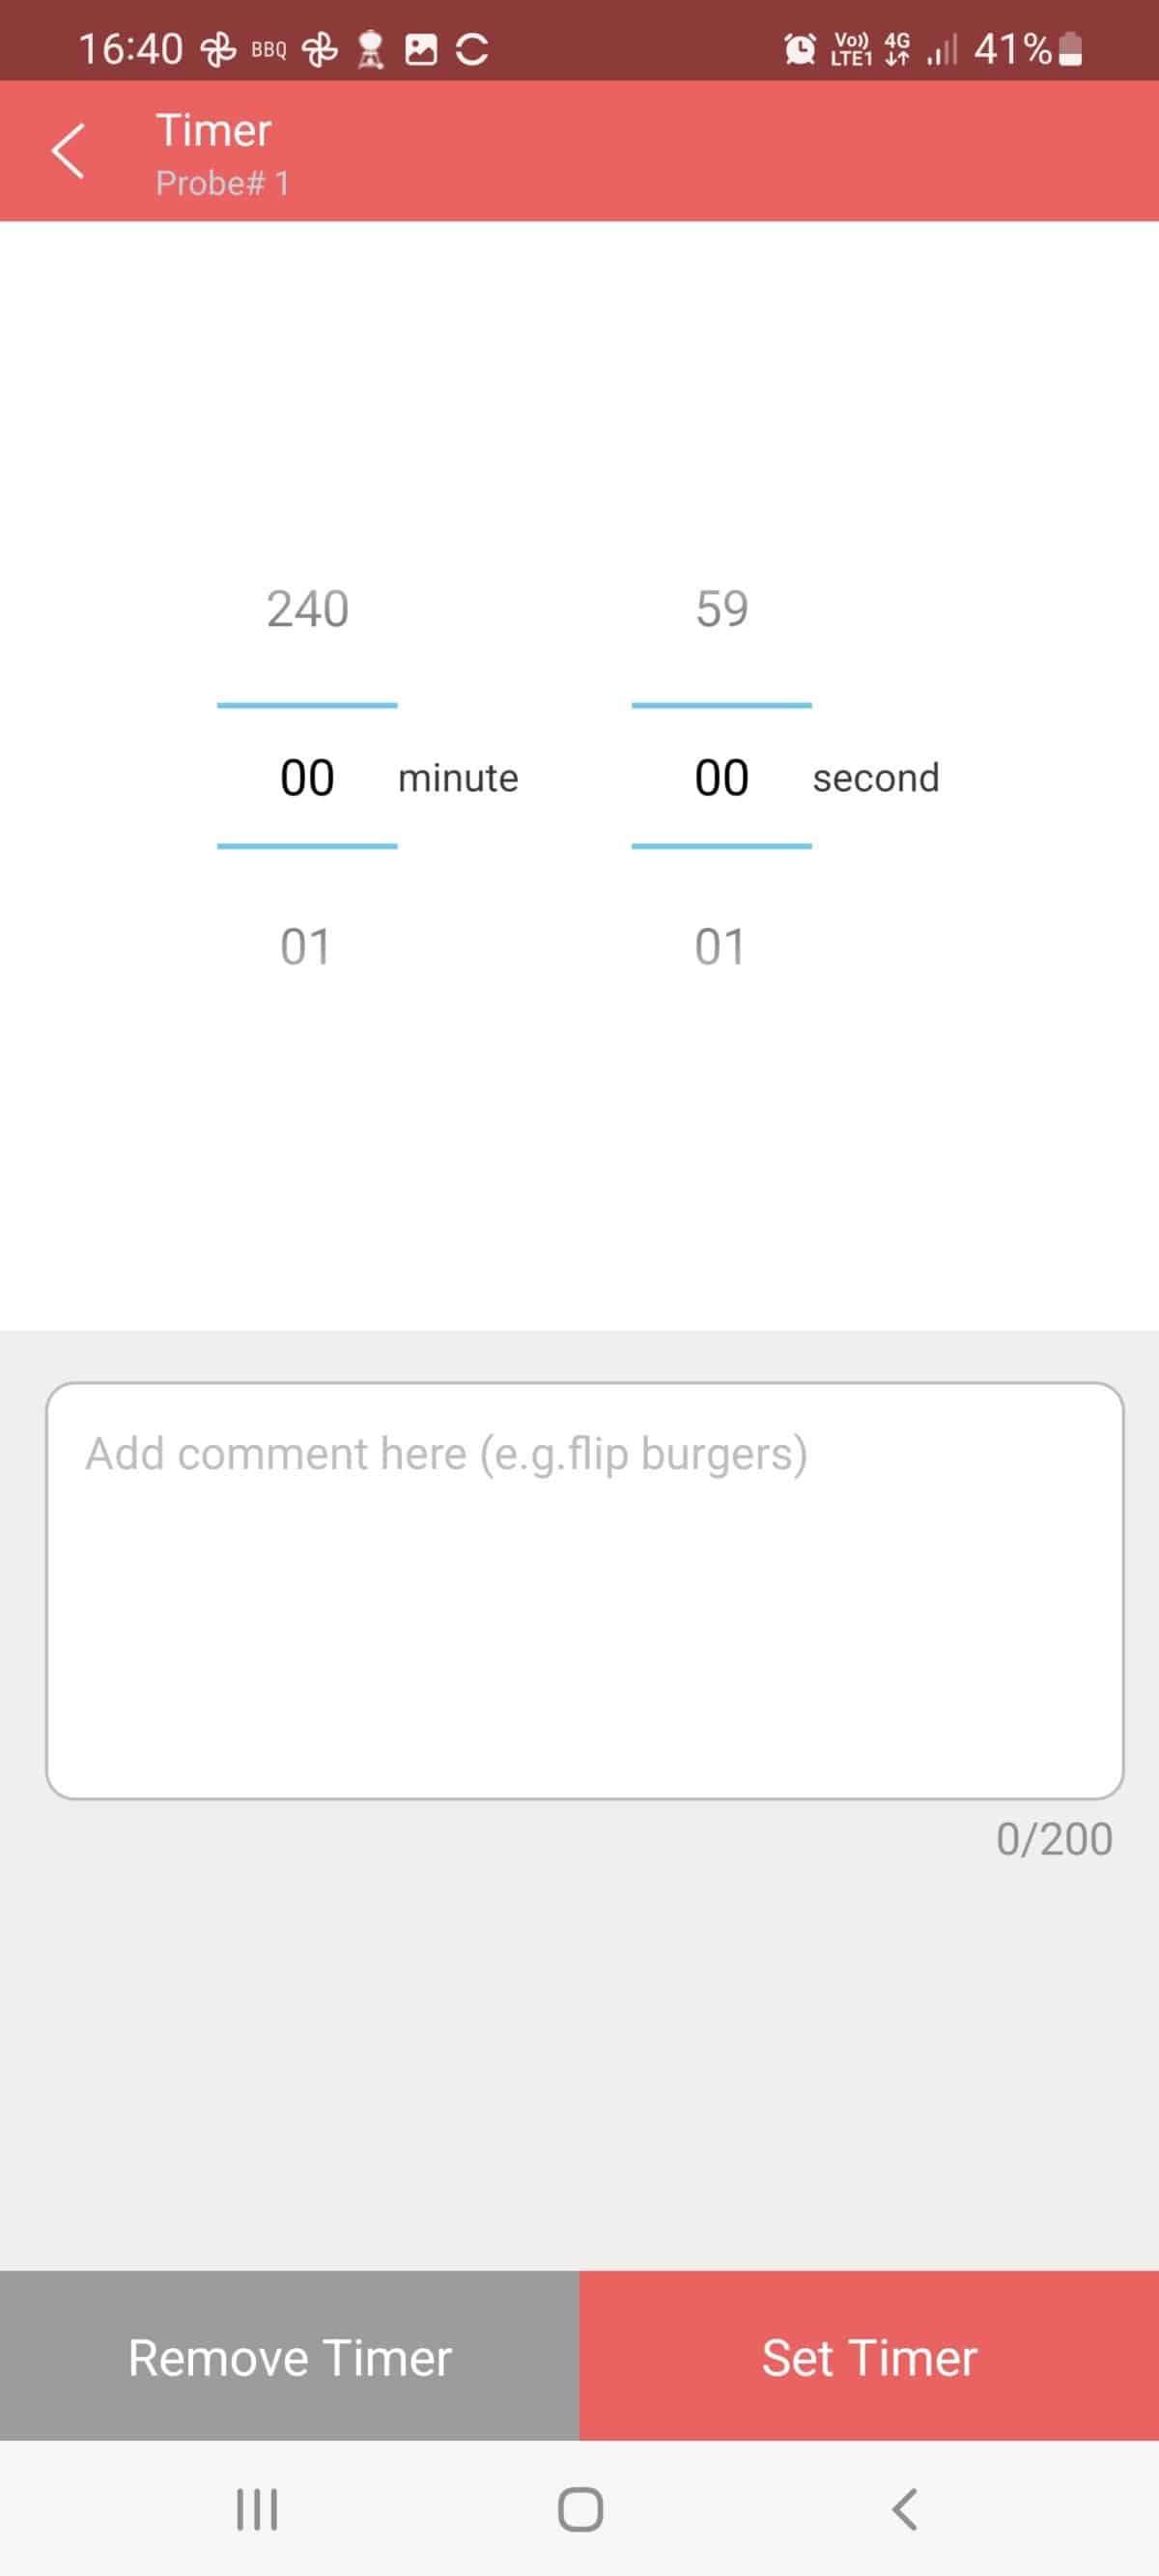 inkbird bbqgo smartphone app screenshot showing how to set a timer.